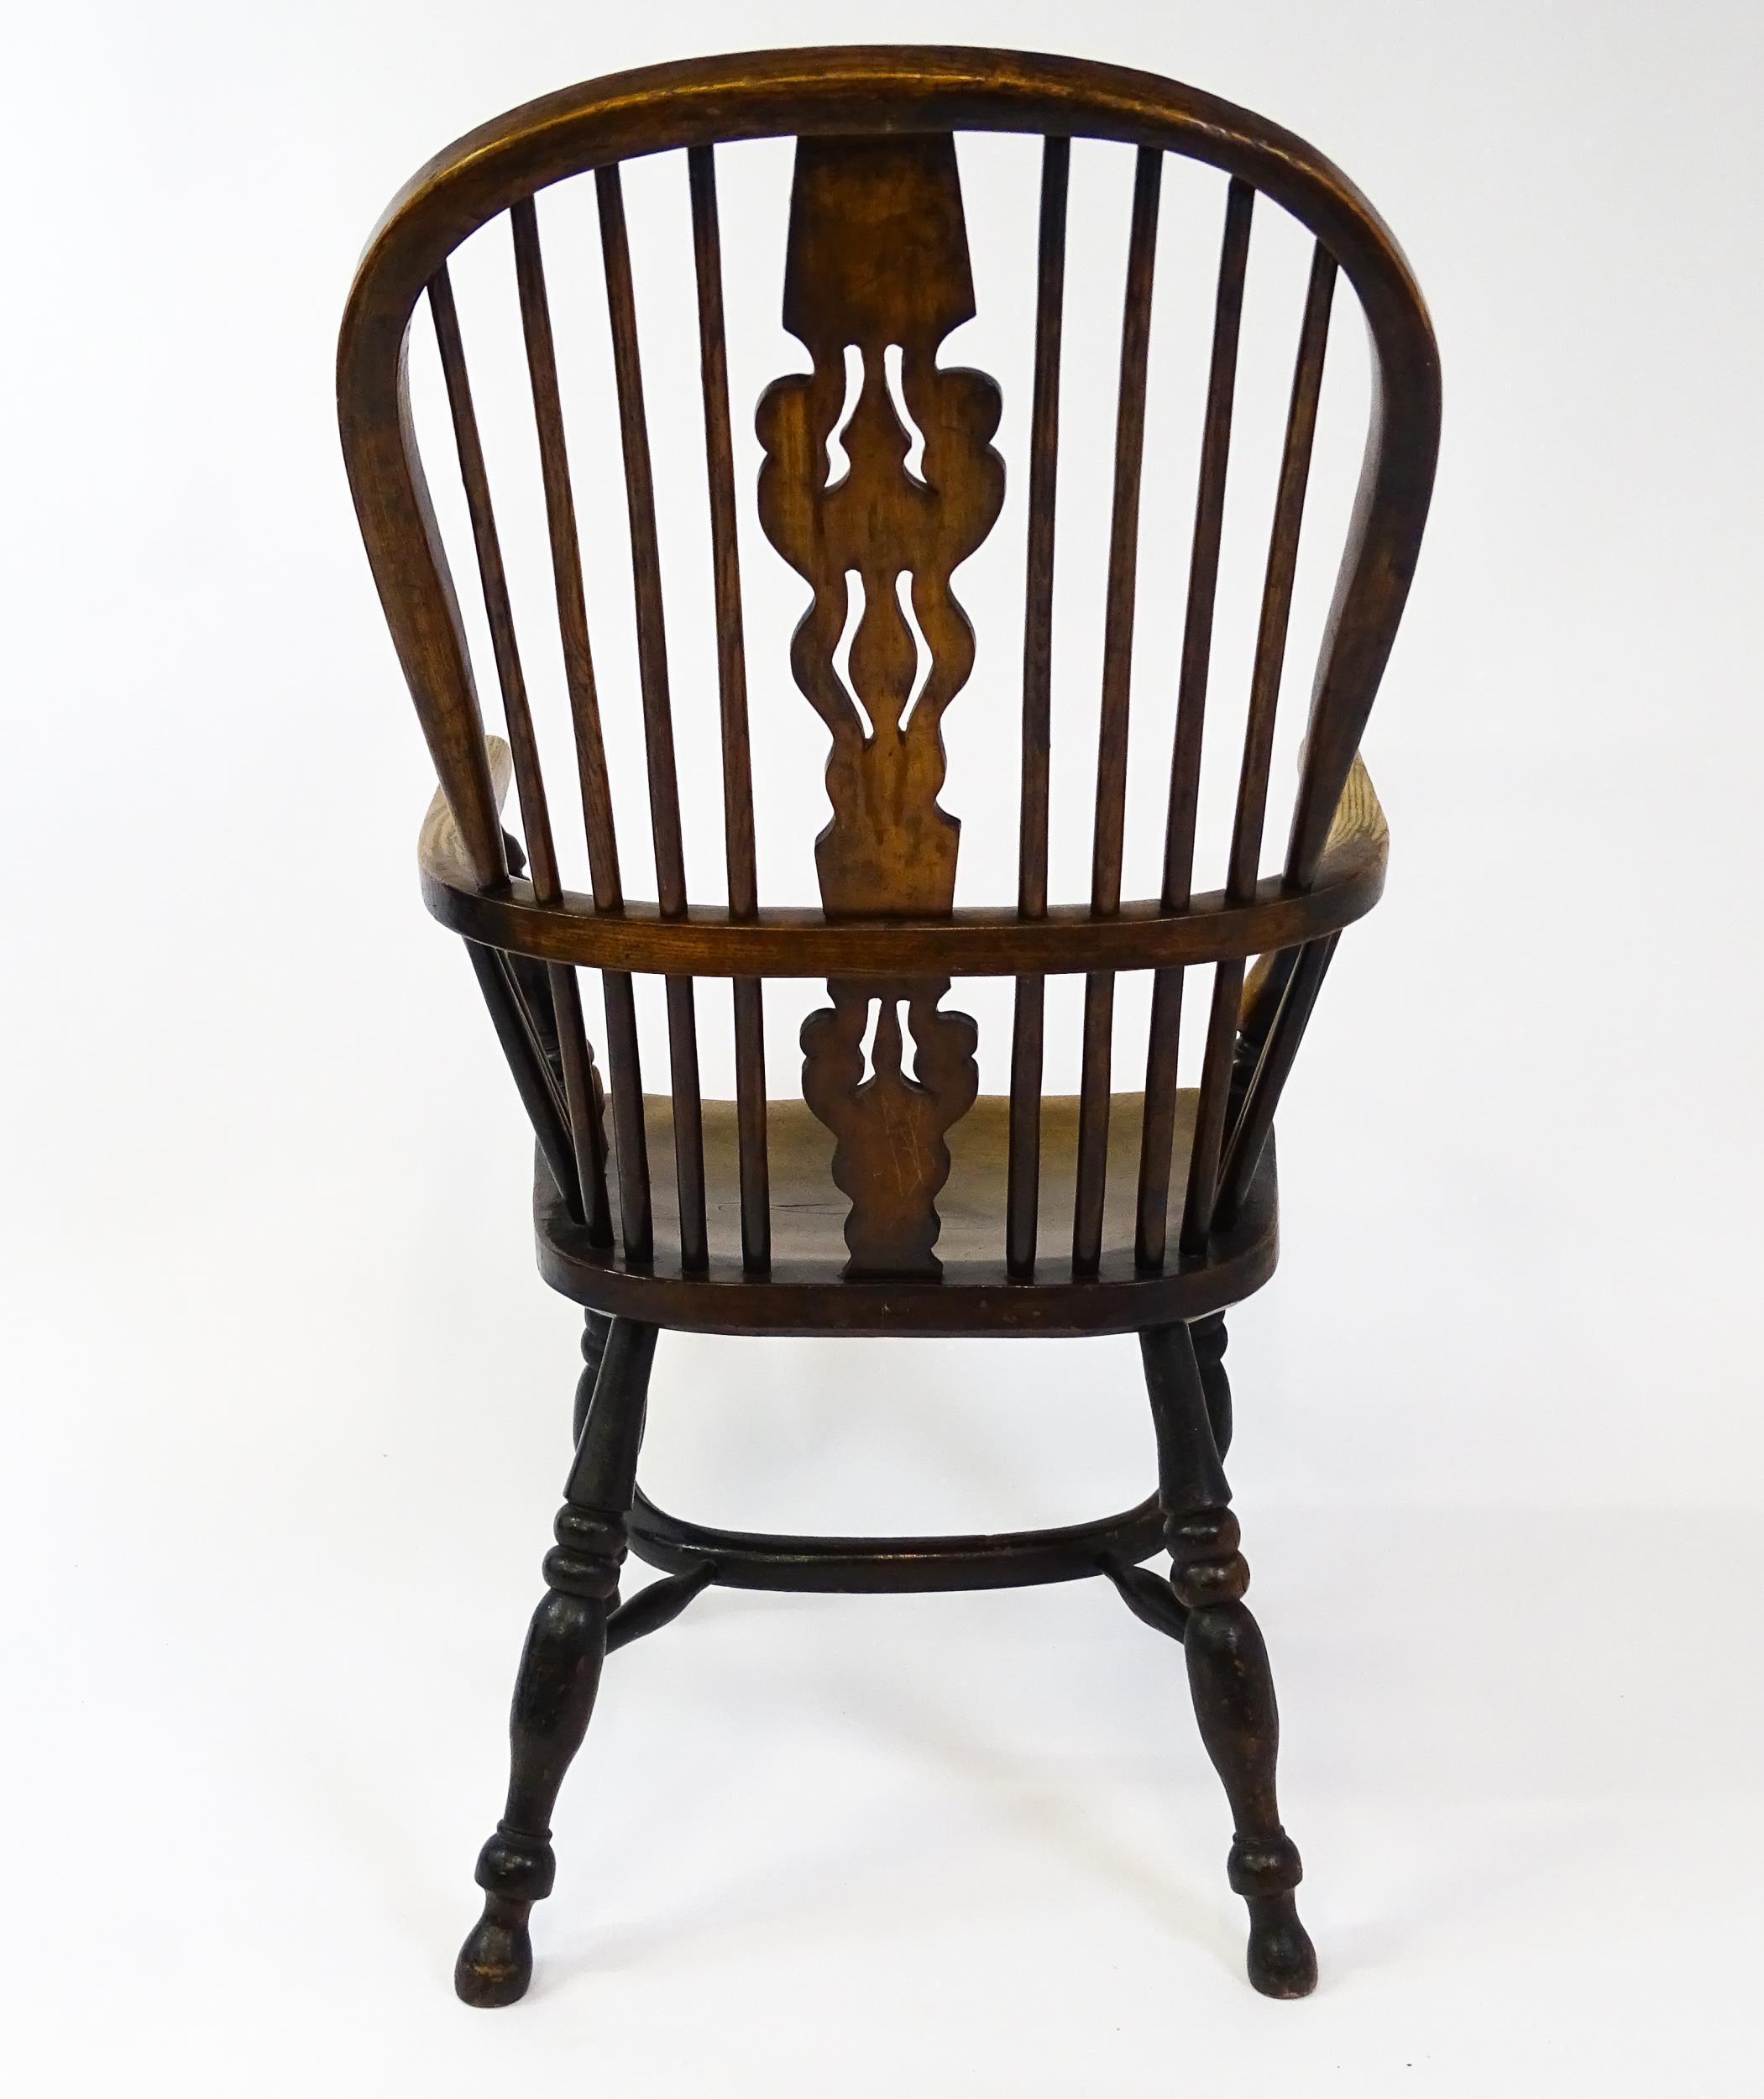 A mid 19thC ash and elm Windsor chair with a double bowed backrest and a pierced back splat above - Image 2 of 9